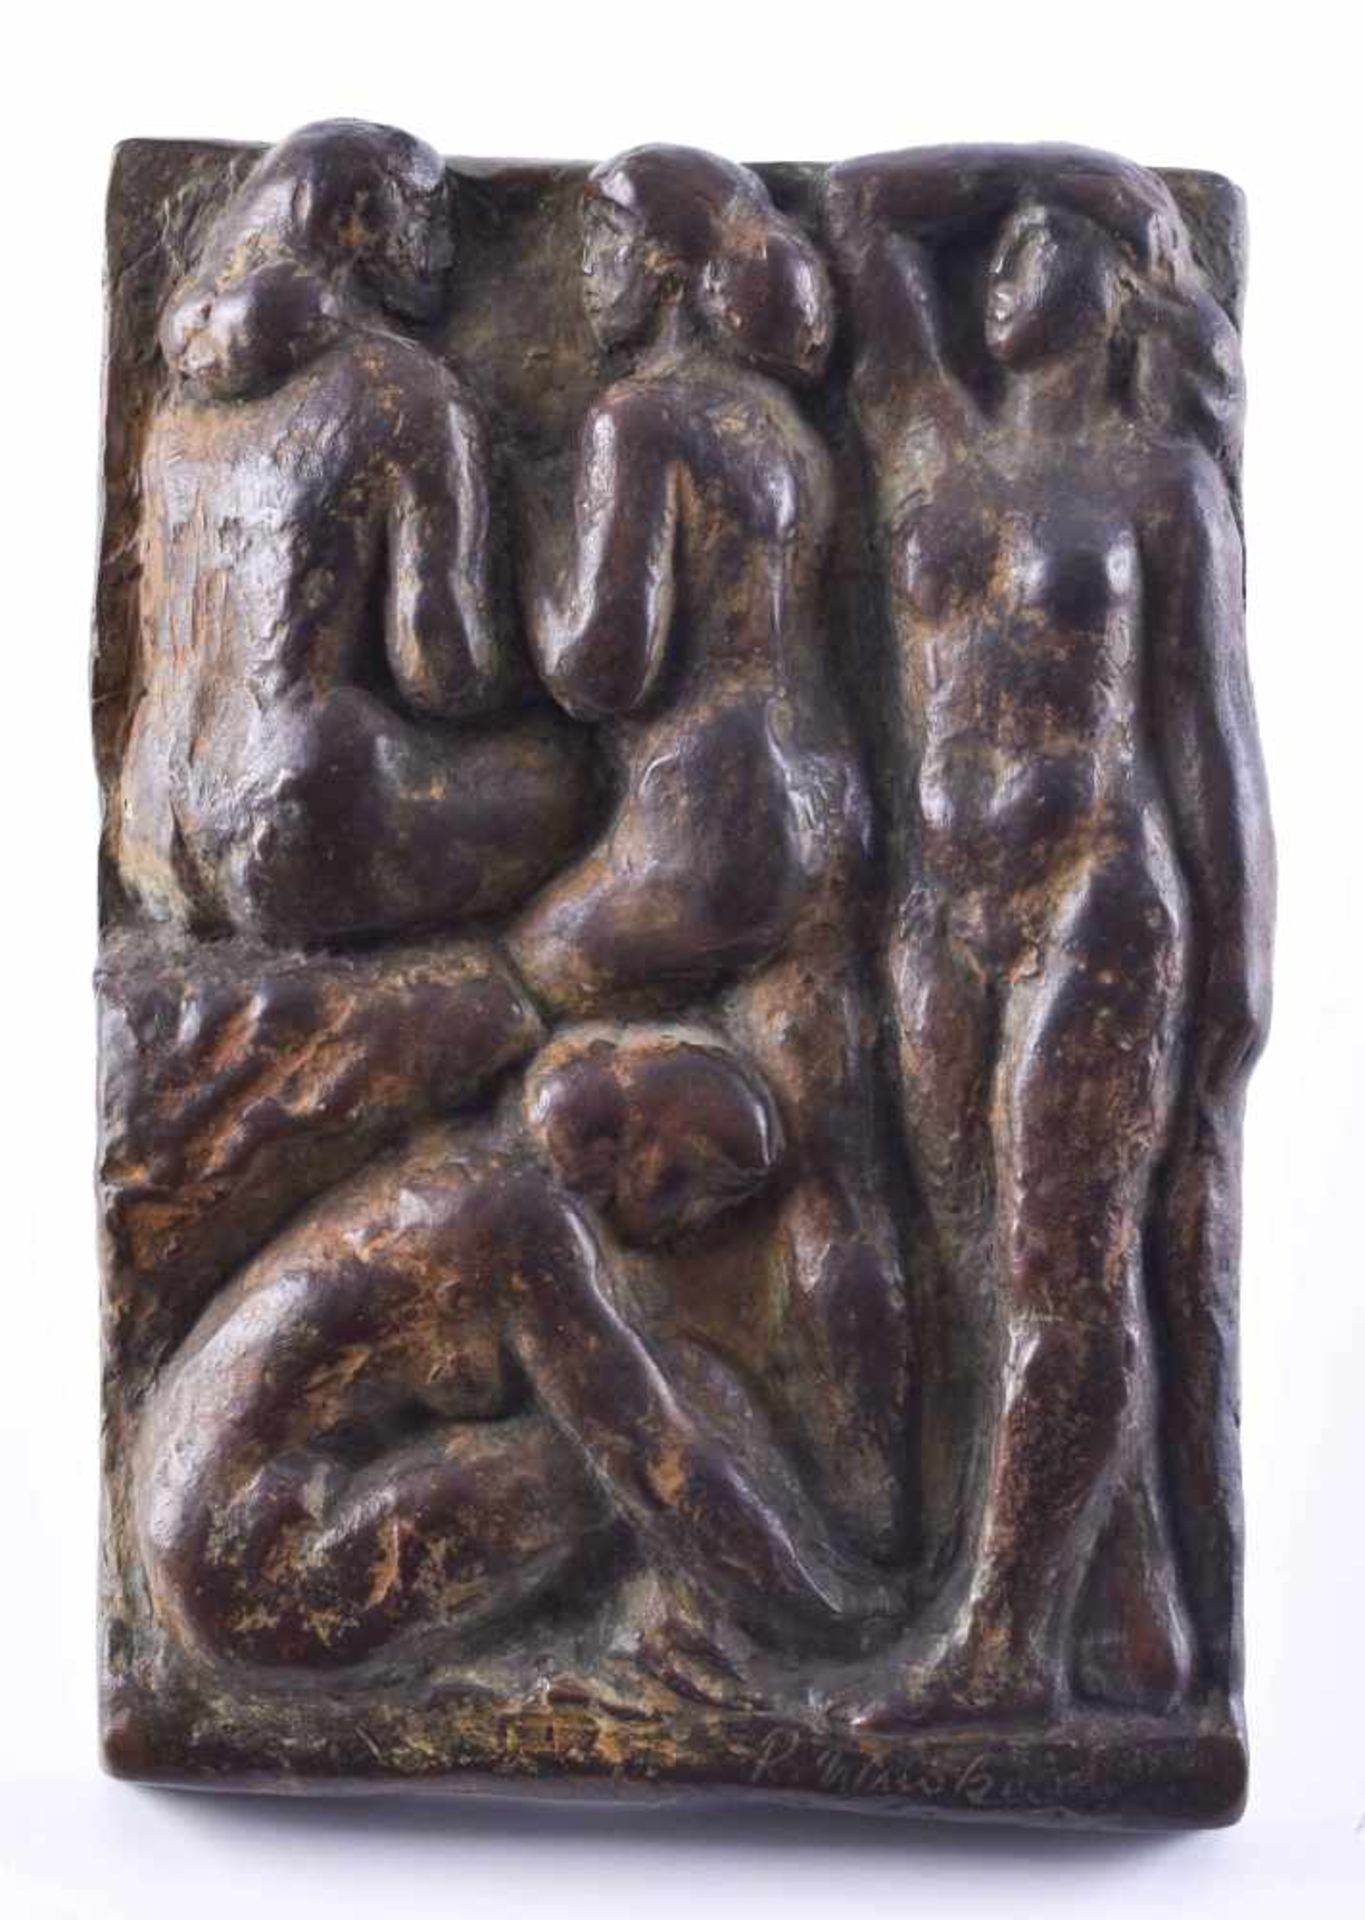 Rolf WINKLER (1930-2001)"Im Bade"sculpture - Bronze relief, 25 cm x 18 cm,signed on the lower right,